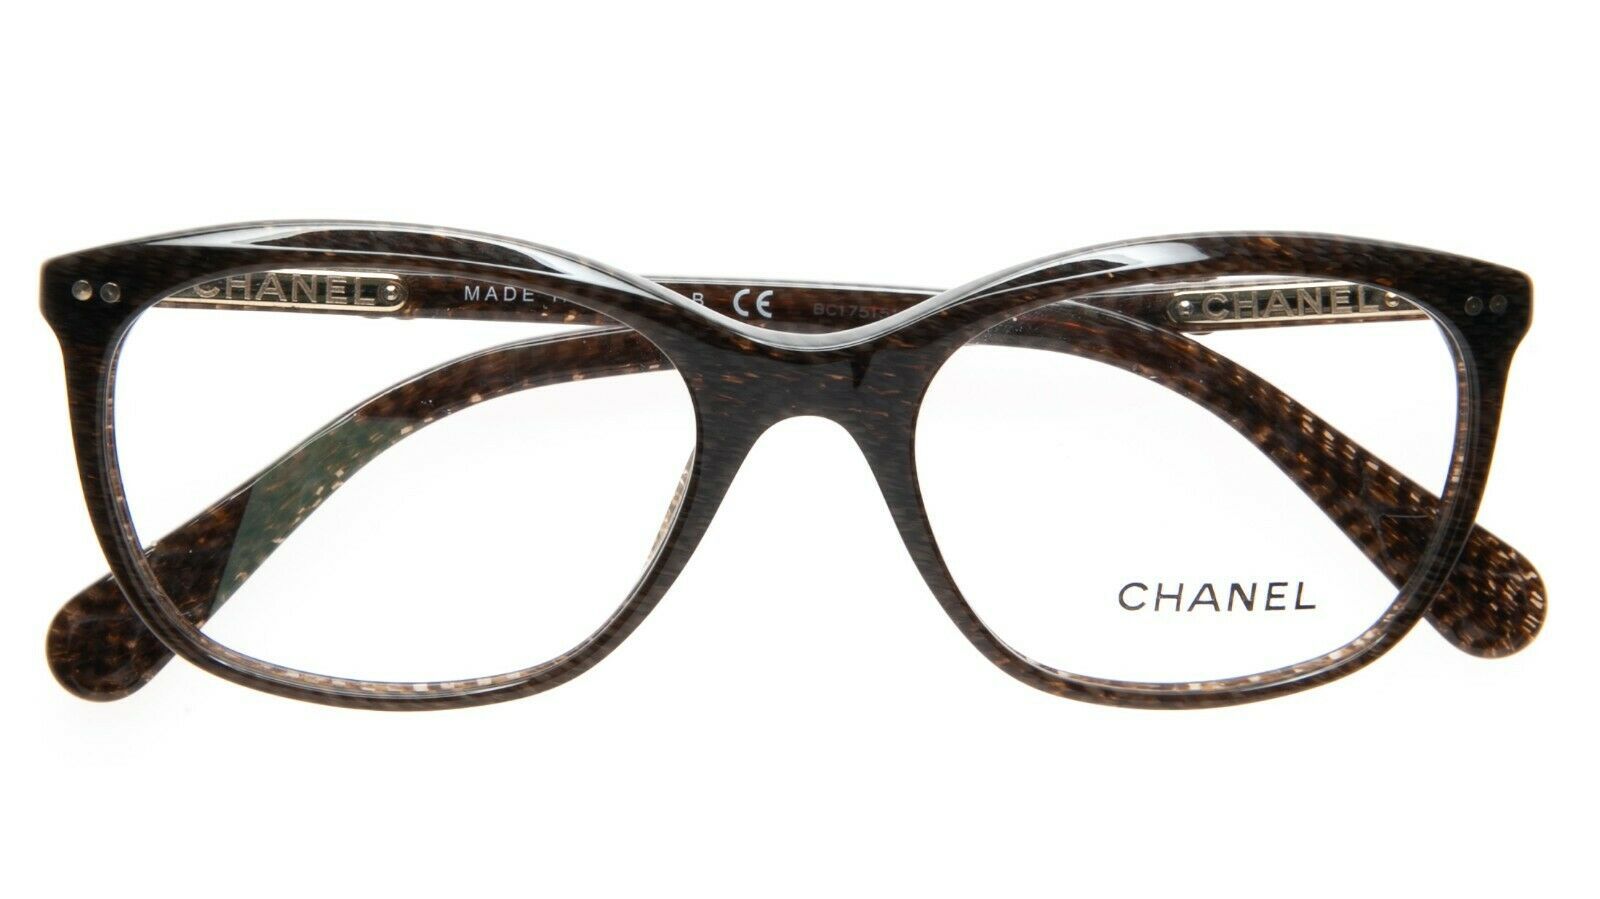 NEW CHANEL 3252 c.1411 CLEAR BROWN /GREY EYEGLASSES FRAME 53-18-140 B39mm  Italy